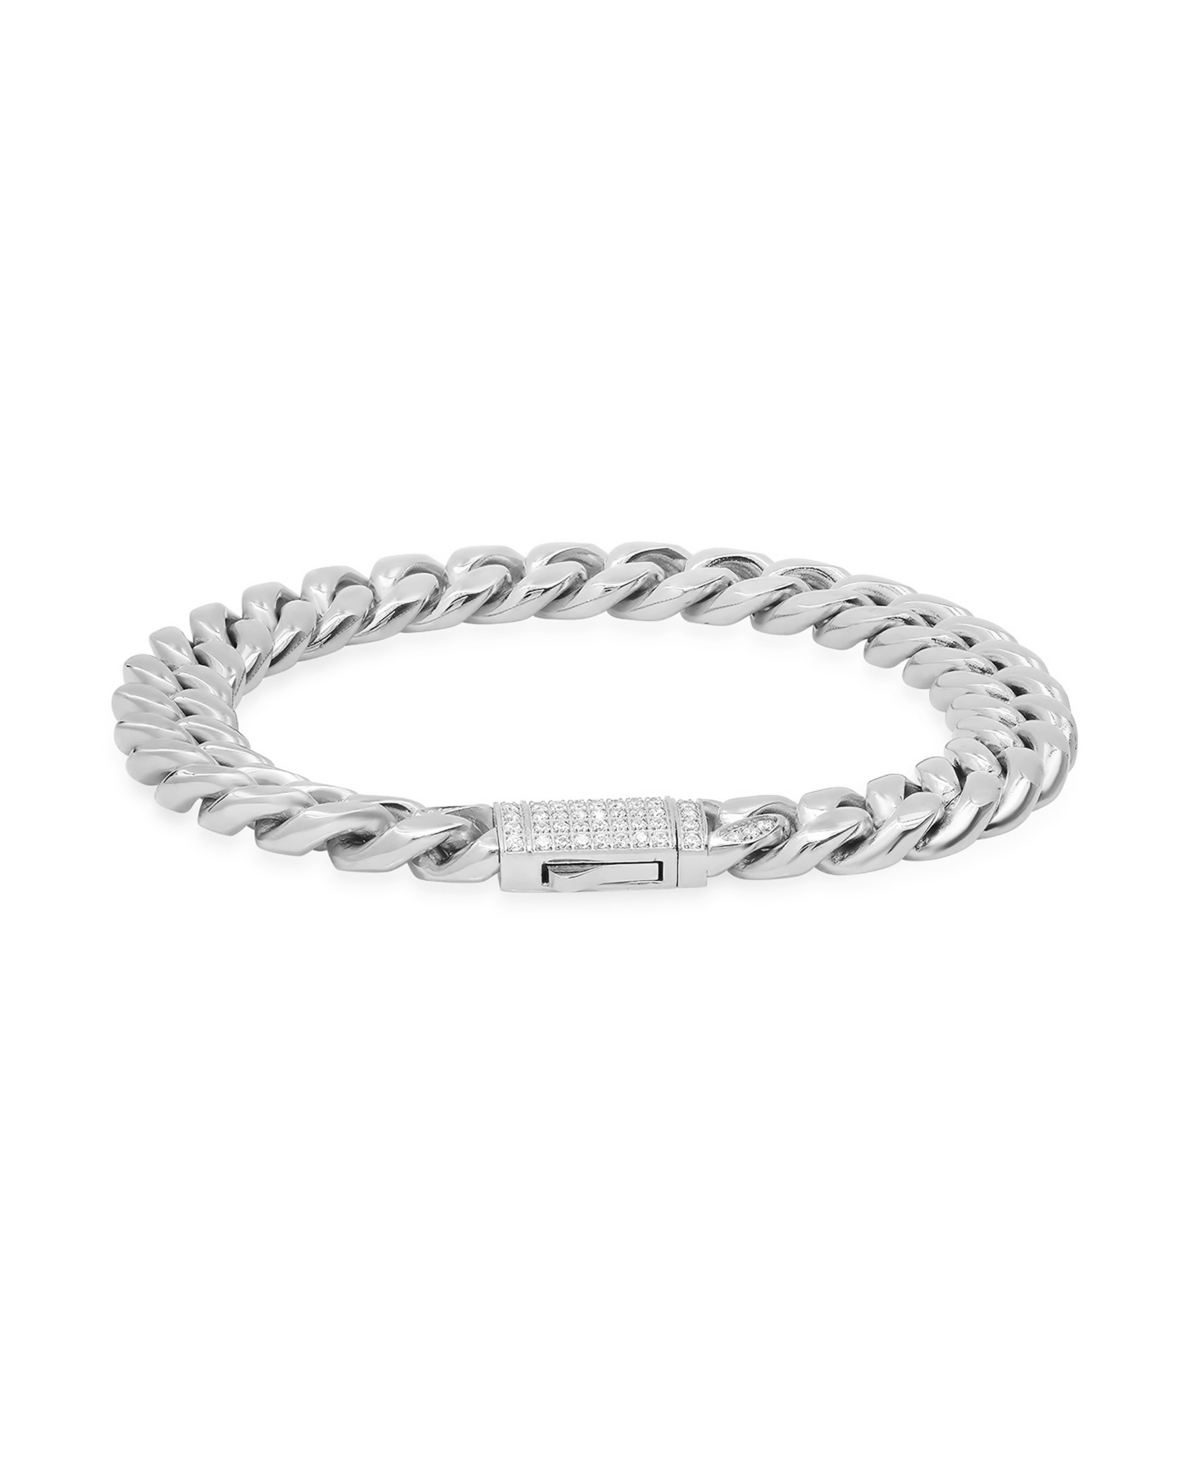 Men's Stainless Steel Thick Cuban Link Chain Bracelet with Simulated Diamonds Clasp - Silver-tone